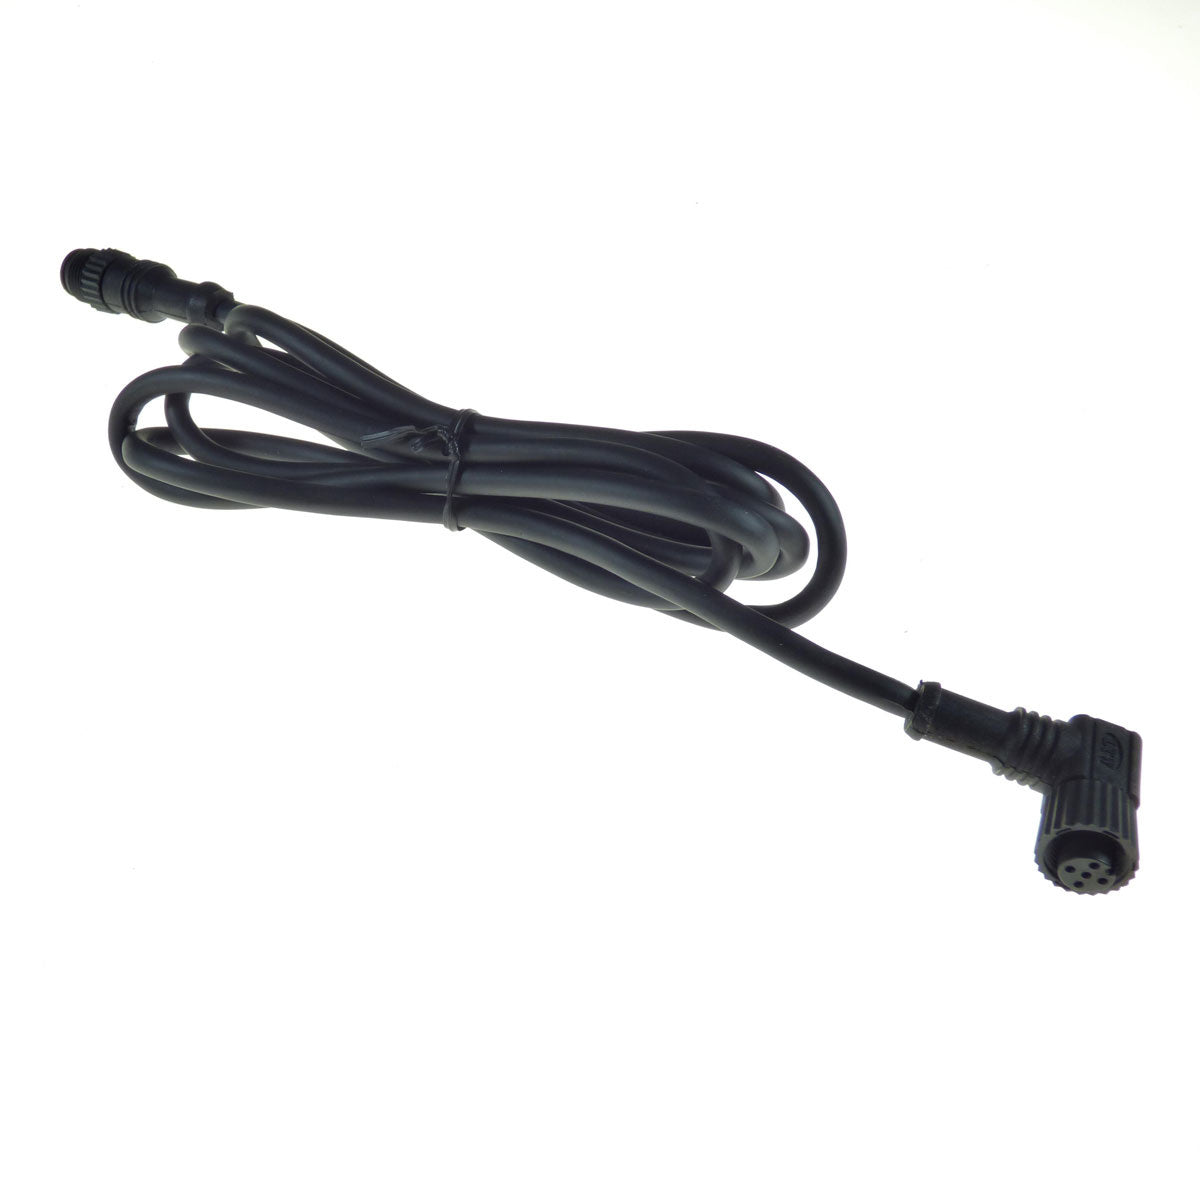 Torqeedo - 5-Pin Cable extension for throttle - 5 foot